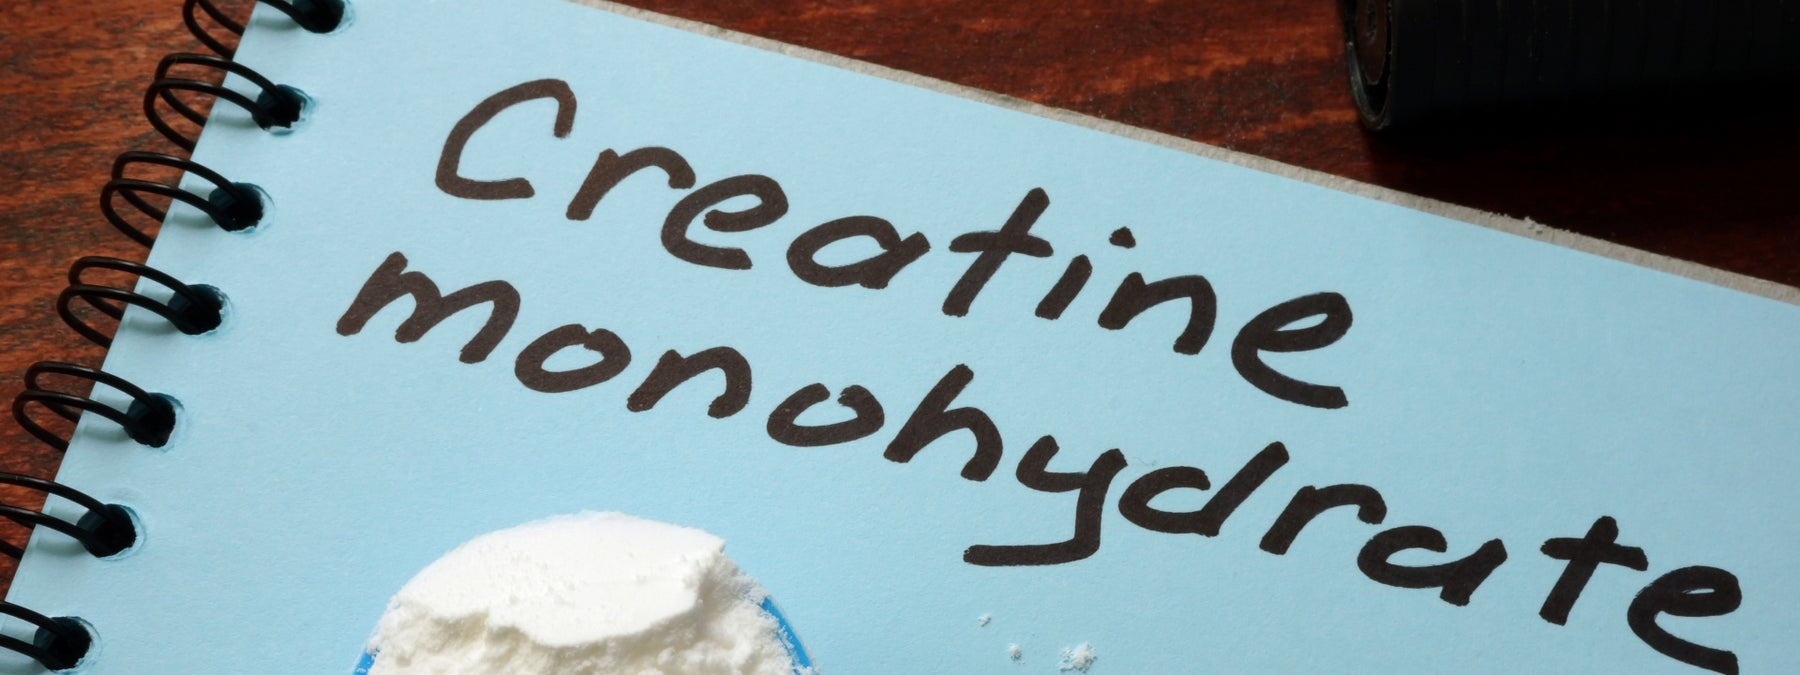 Creatine Crash Course: What is The Best Creatine Form?